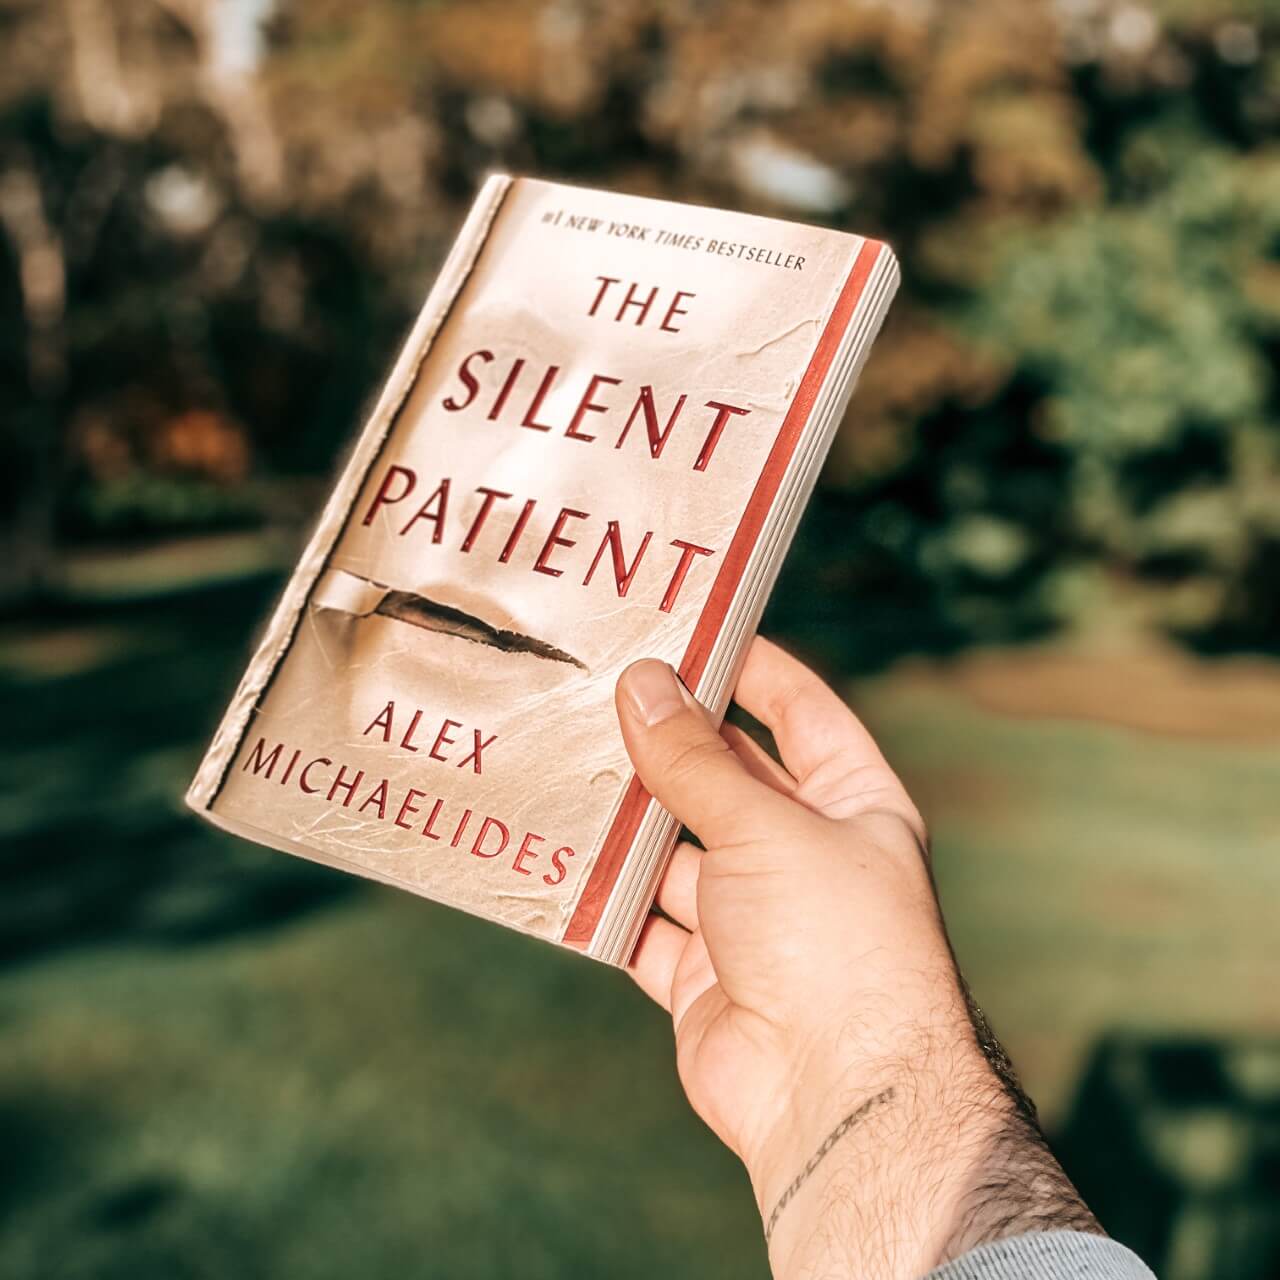 Stylized photo of The Silent Patient by Alex Michaelides